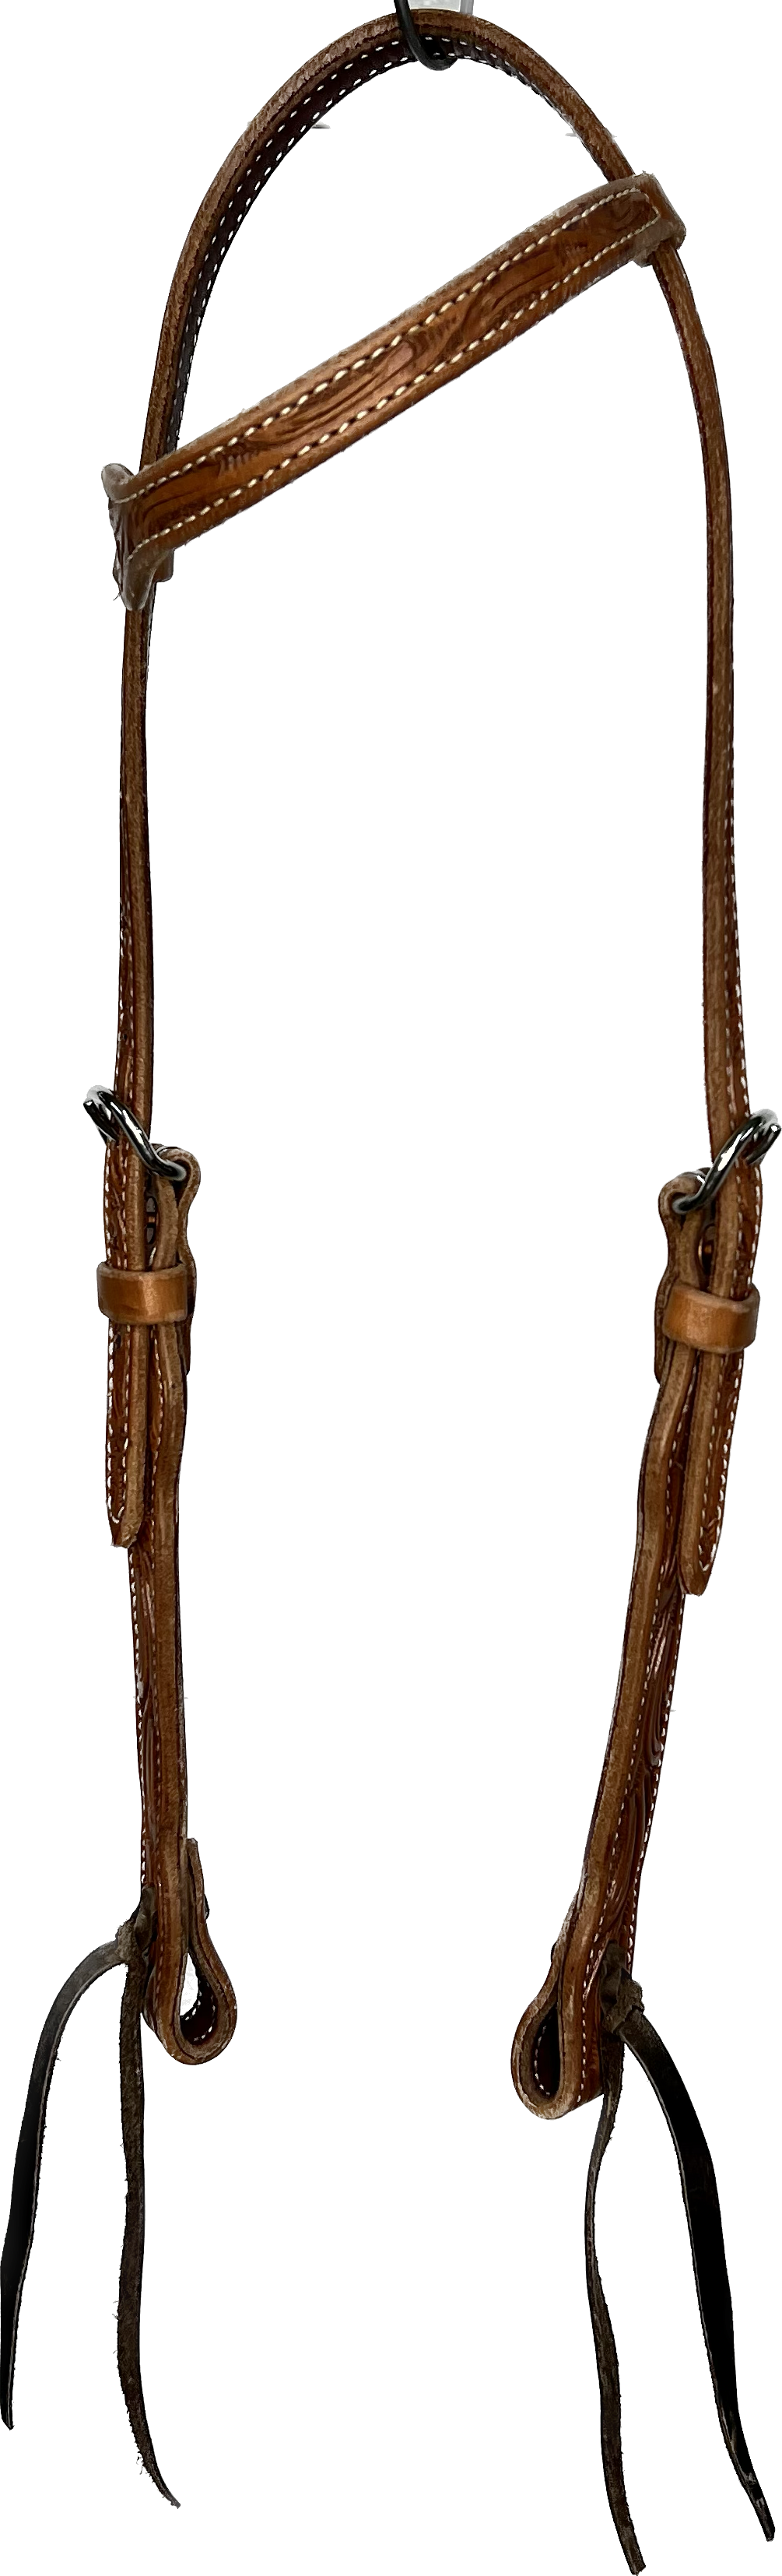 Cactus Saddlery Floral Tooled One Ear Headstall